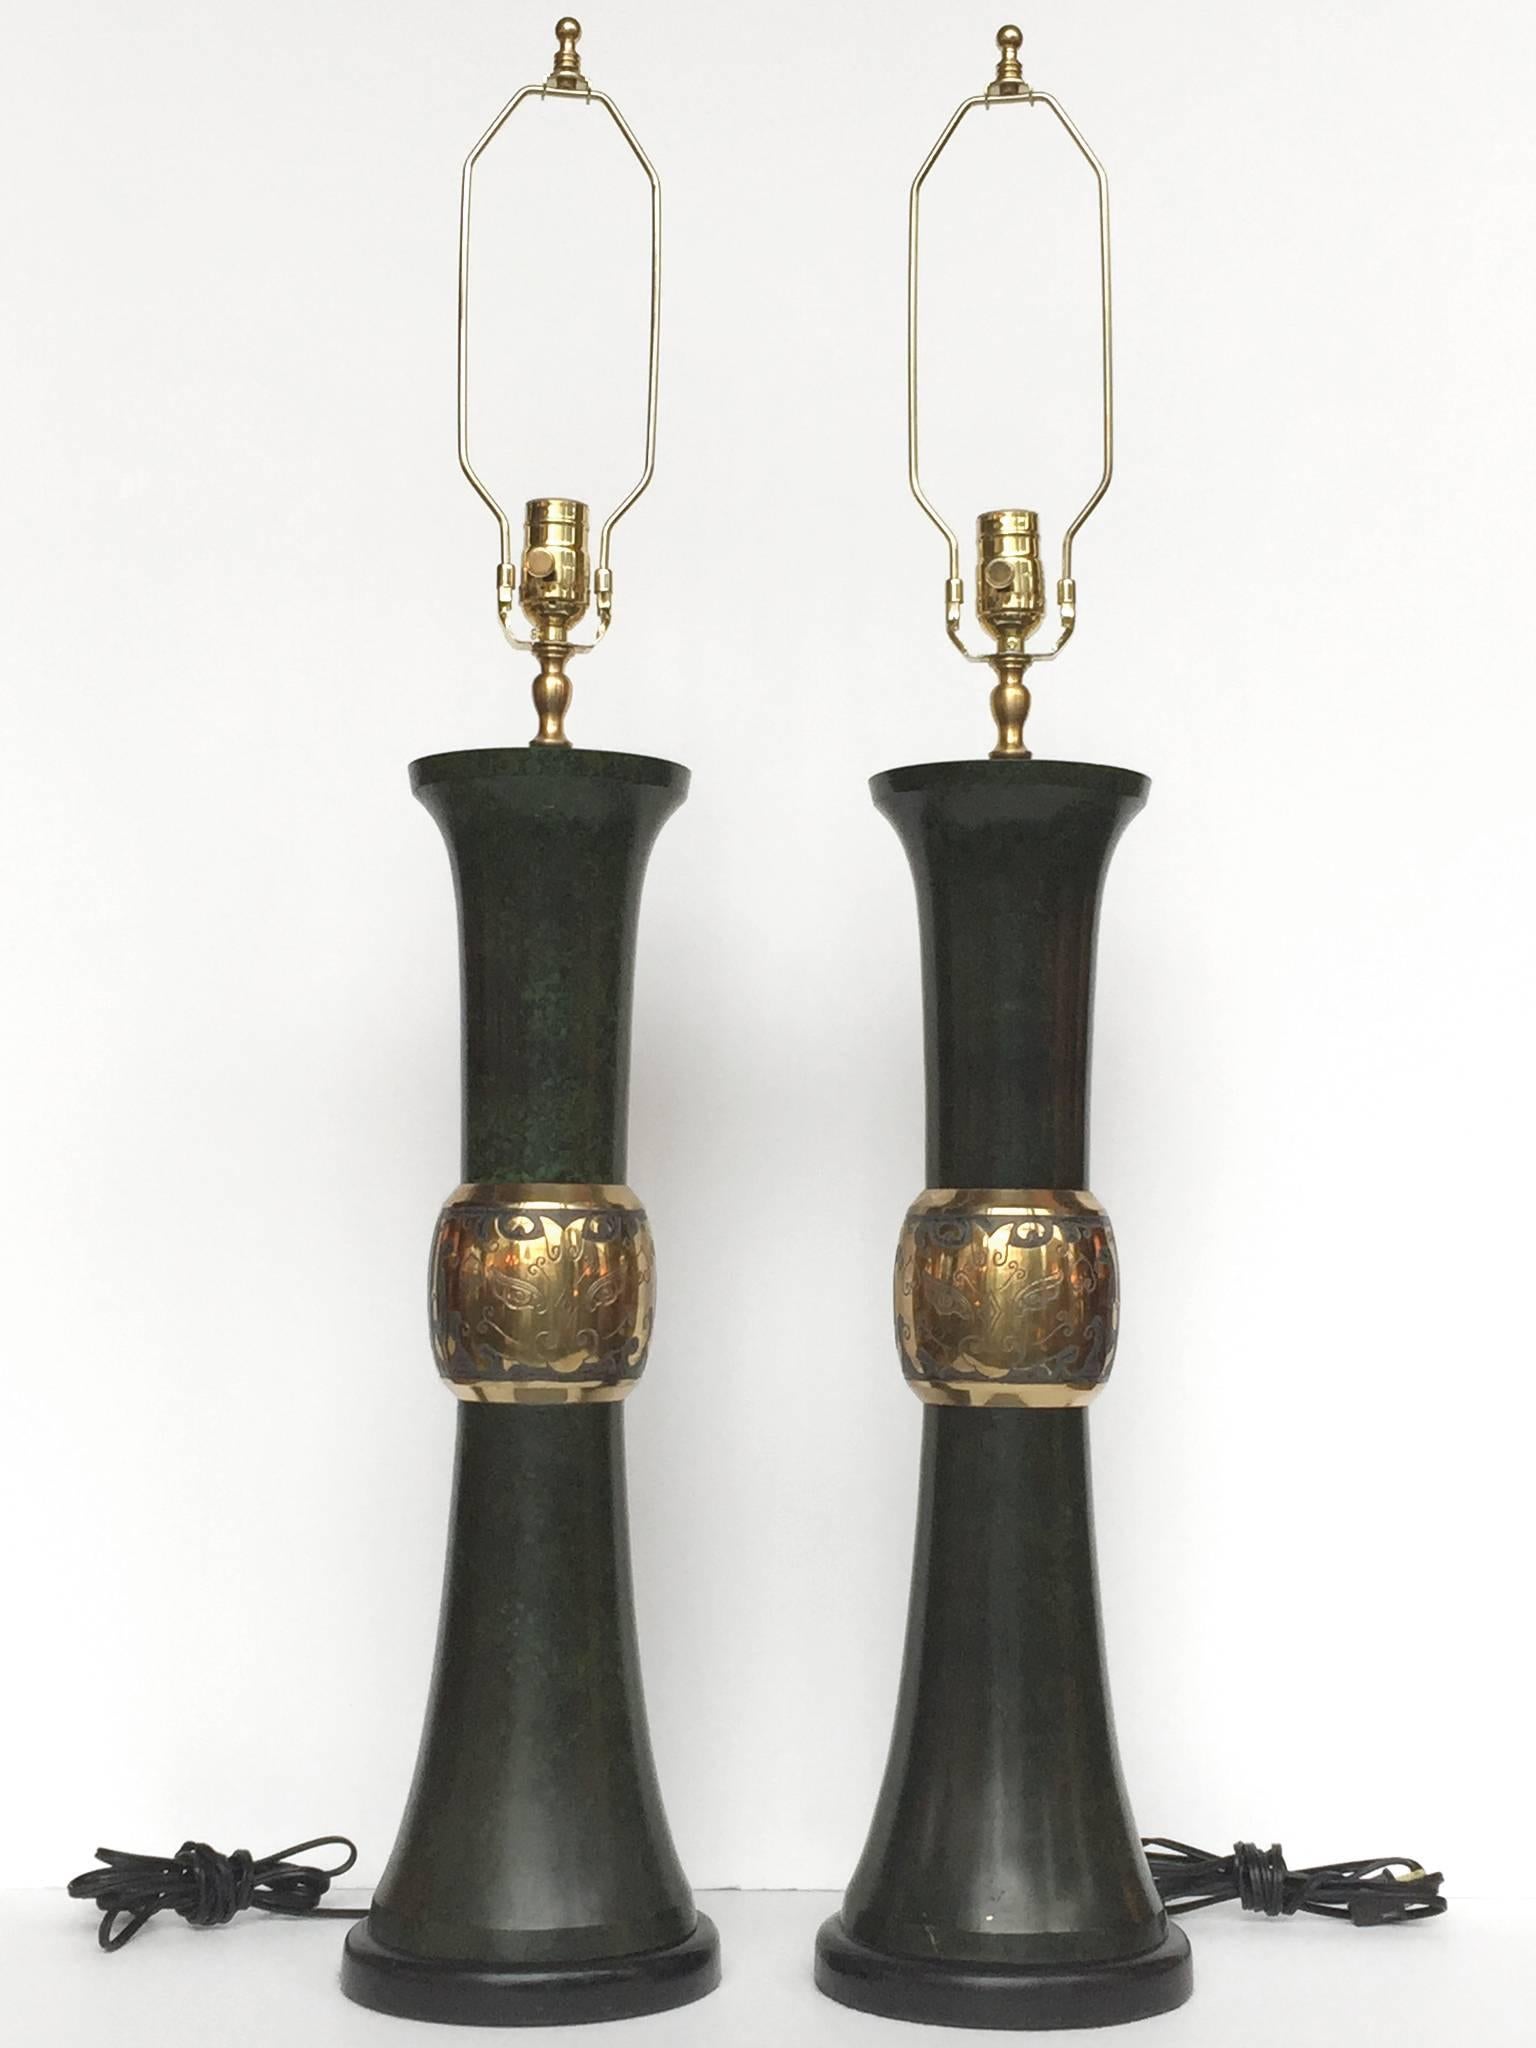 Hollywood Regency Pair of Midcentury Faux Malachite Lamps in the Style of James Mont